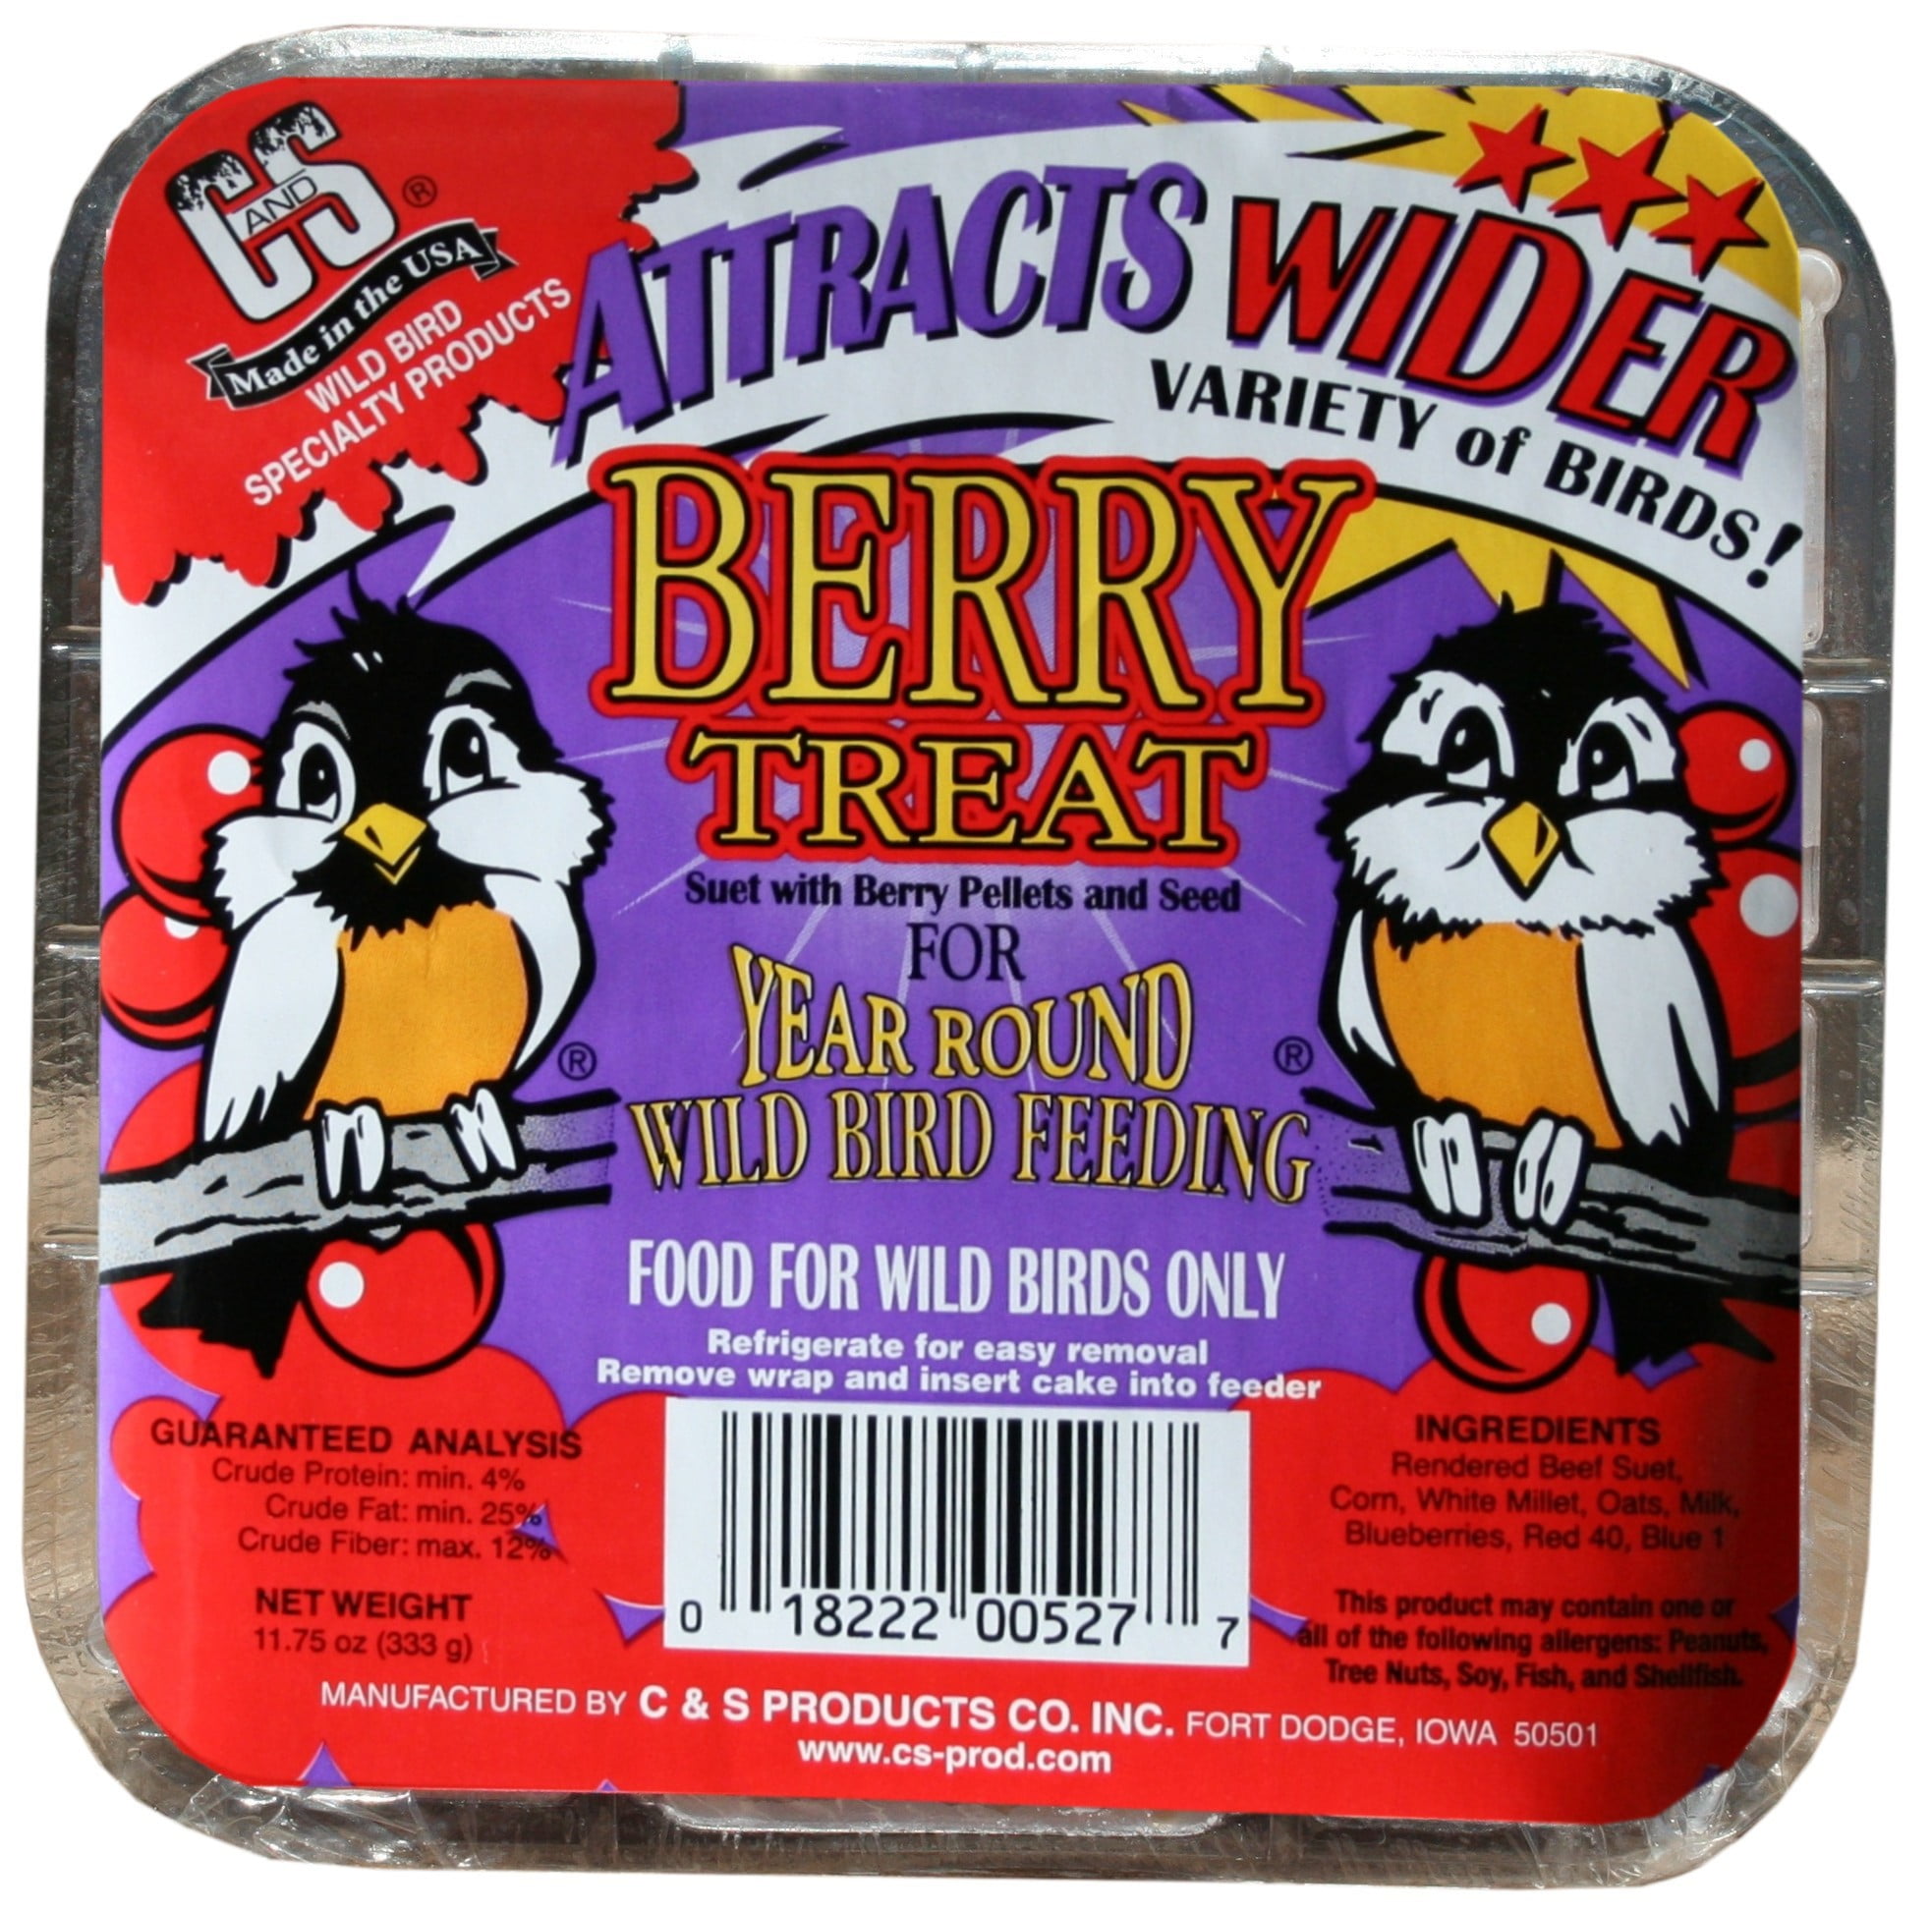 FREE SHIPPING Hand Made Bird Suet Cakes Nutty & Nice Flavor of 4 Cakes Qty 